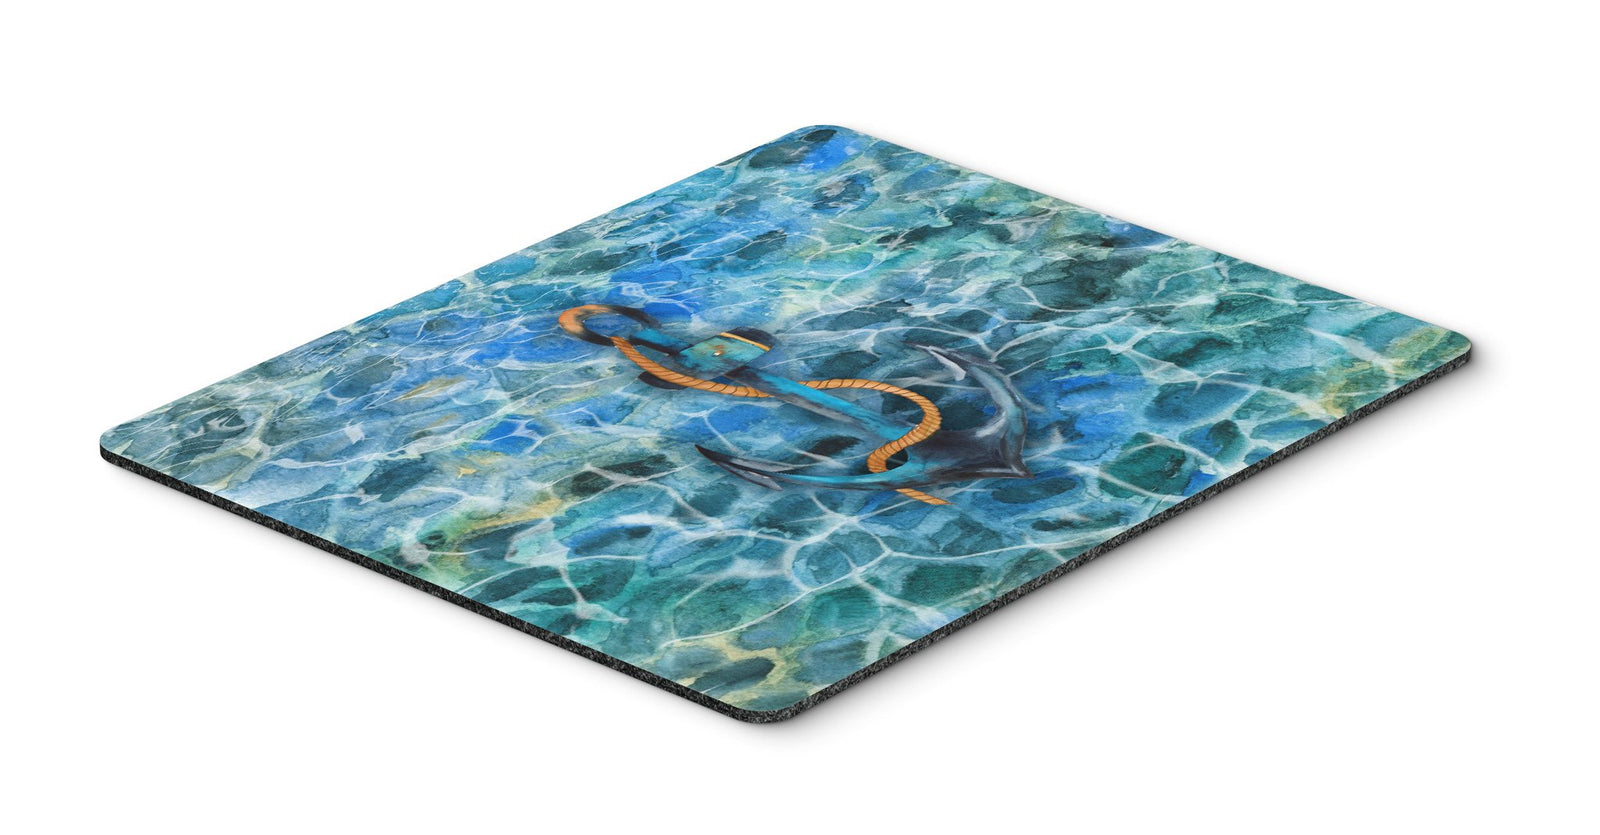 Anchor and Rope Mouse Pad, Hot Pad or Trivet BB5370MP by Caroline's Treasures